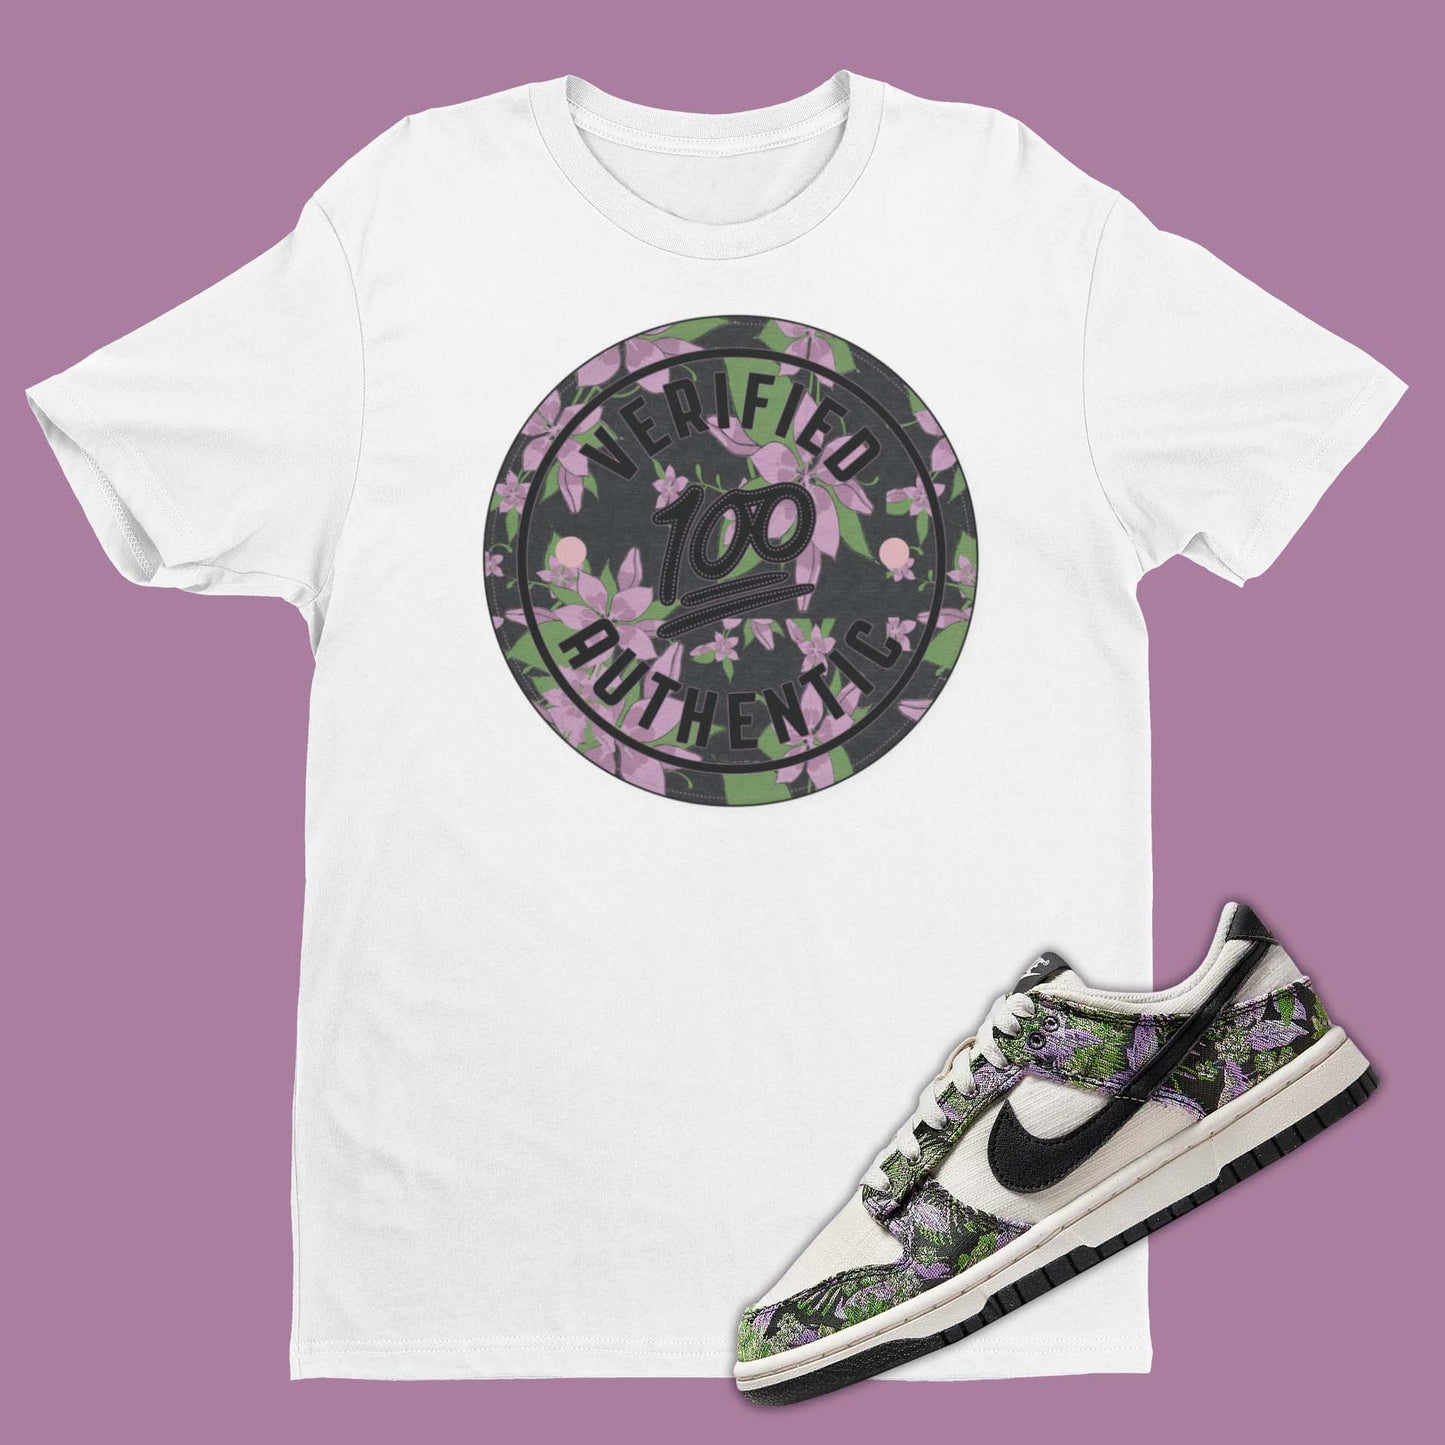 Verified Authentic Nike Dunk Low Floral Tapestry Matching T-Shirt from SNKADX